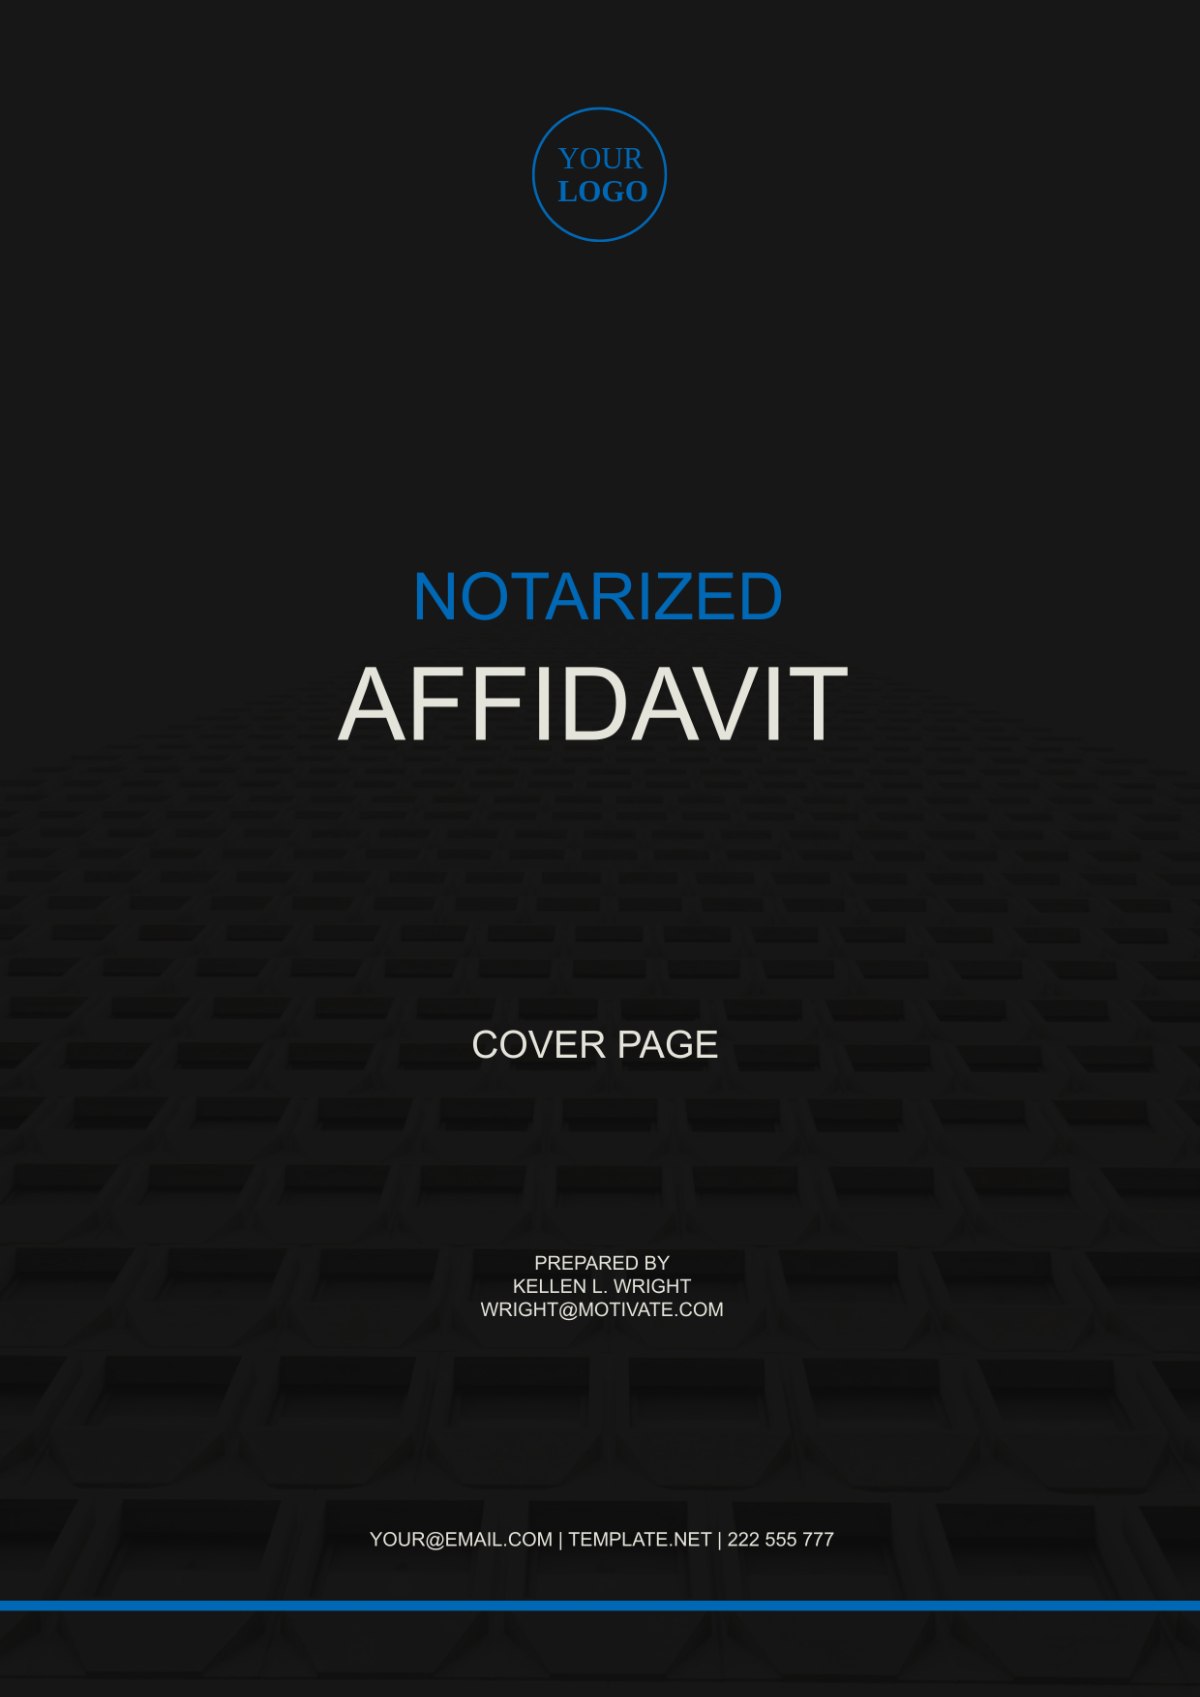 Notarized Affidavit Cover Page Template